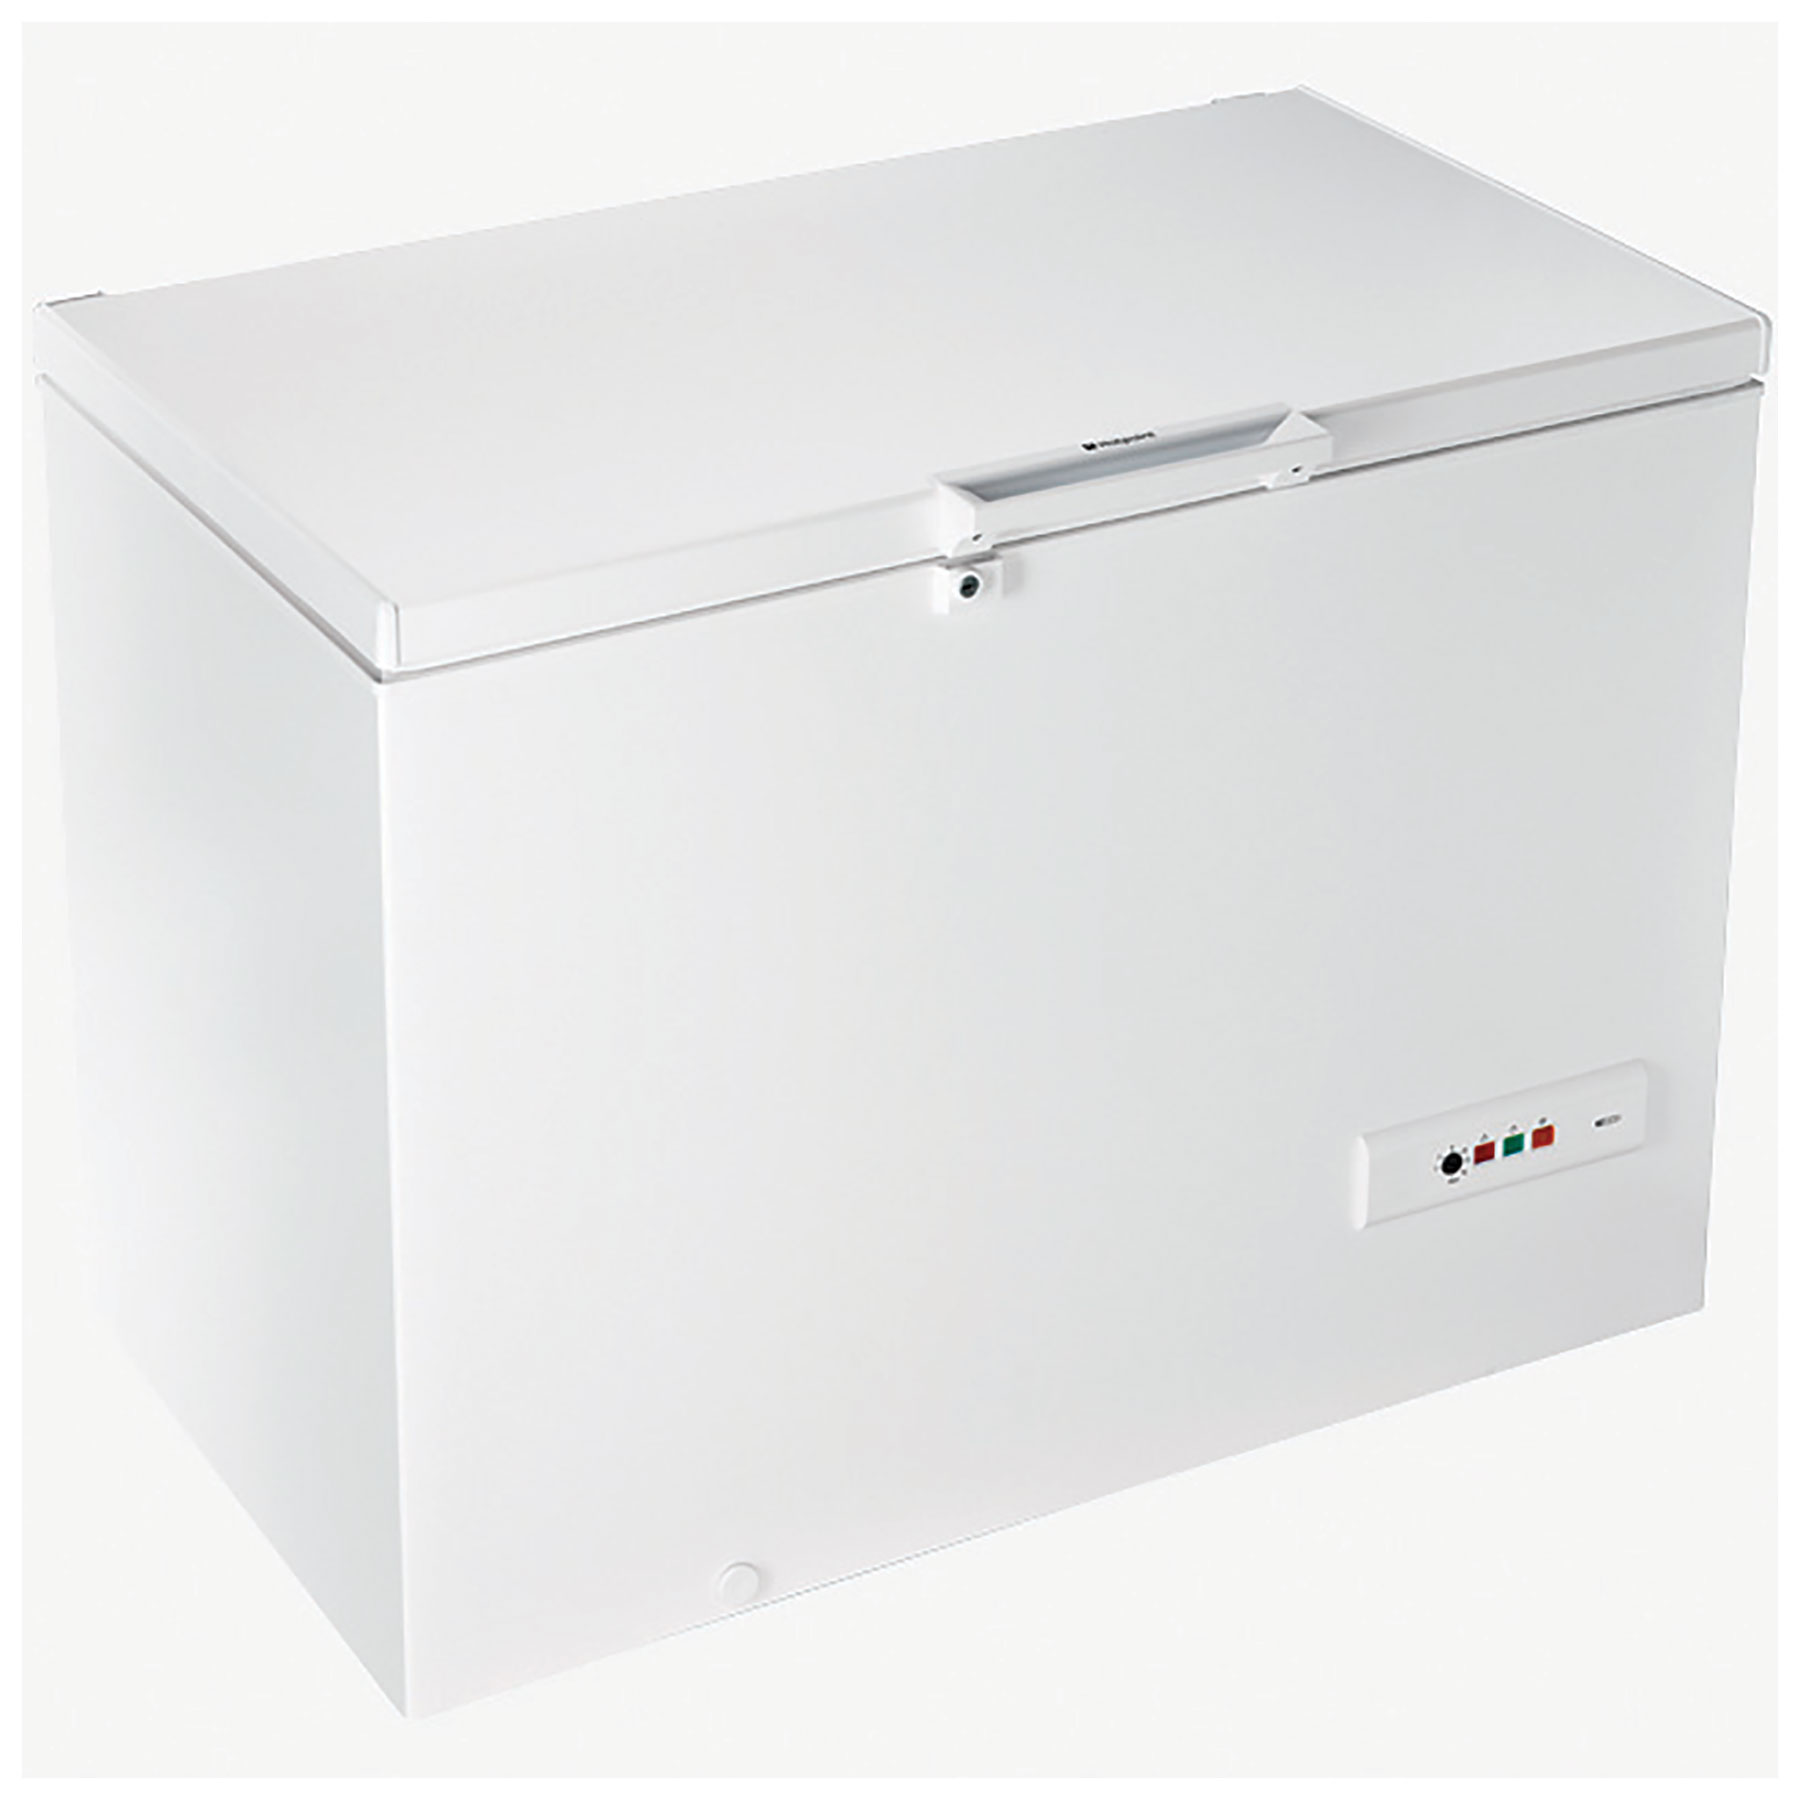 Image of Hotpoint CS2A300HFA1 118cm Chest Freezer in White 315 Litre E Rated